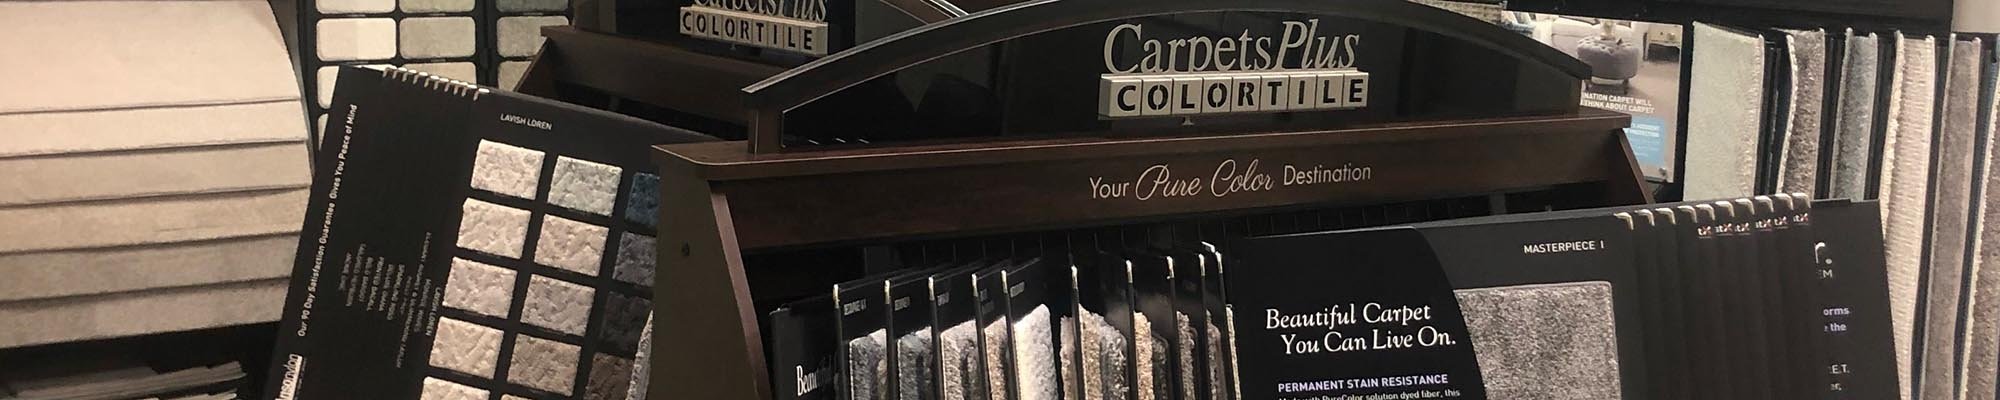 Local Flooring Retailer in Congers, NY - CarpetsPlus COLORTILE of New York providing a wide selection of flooring and expert advice.